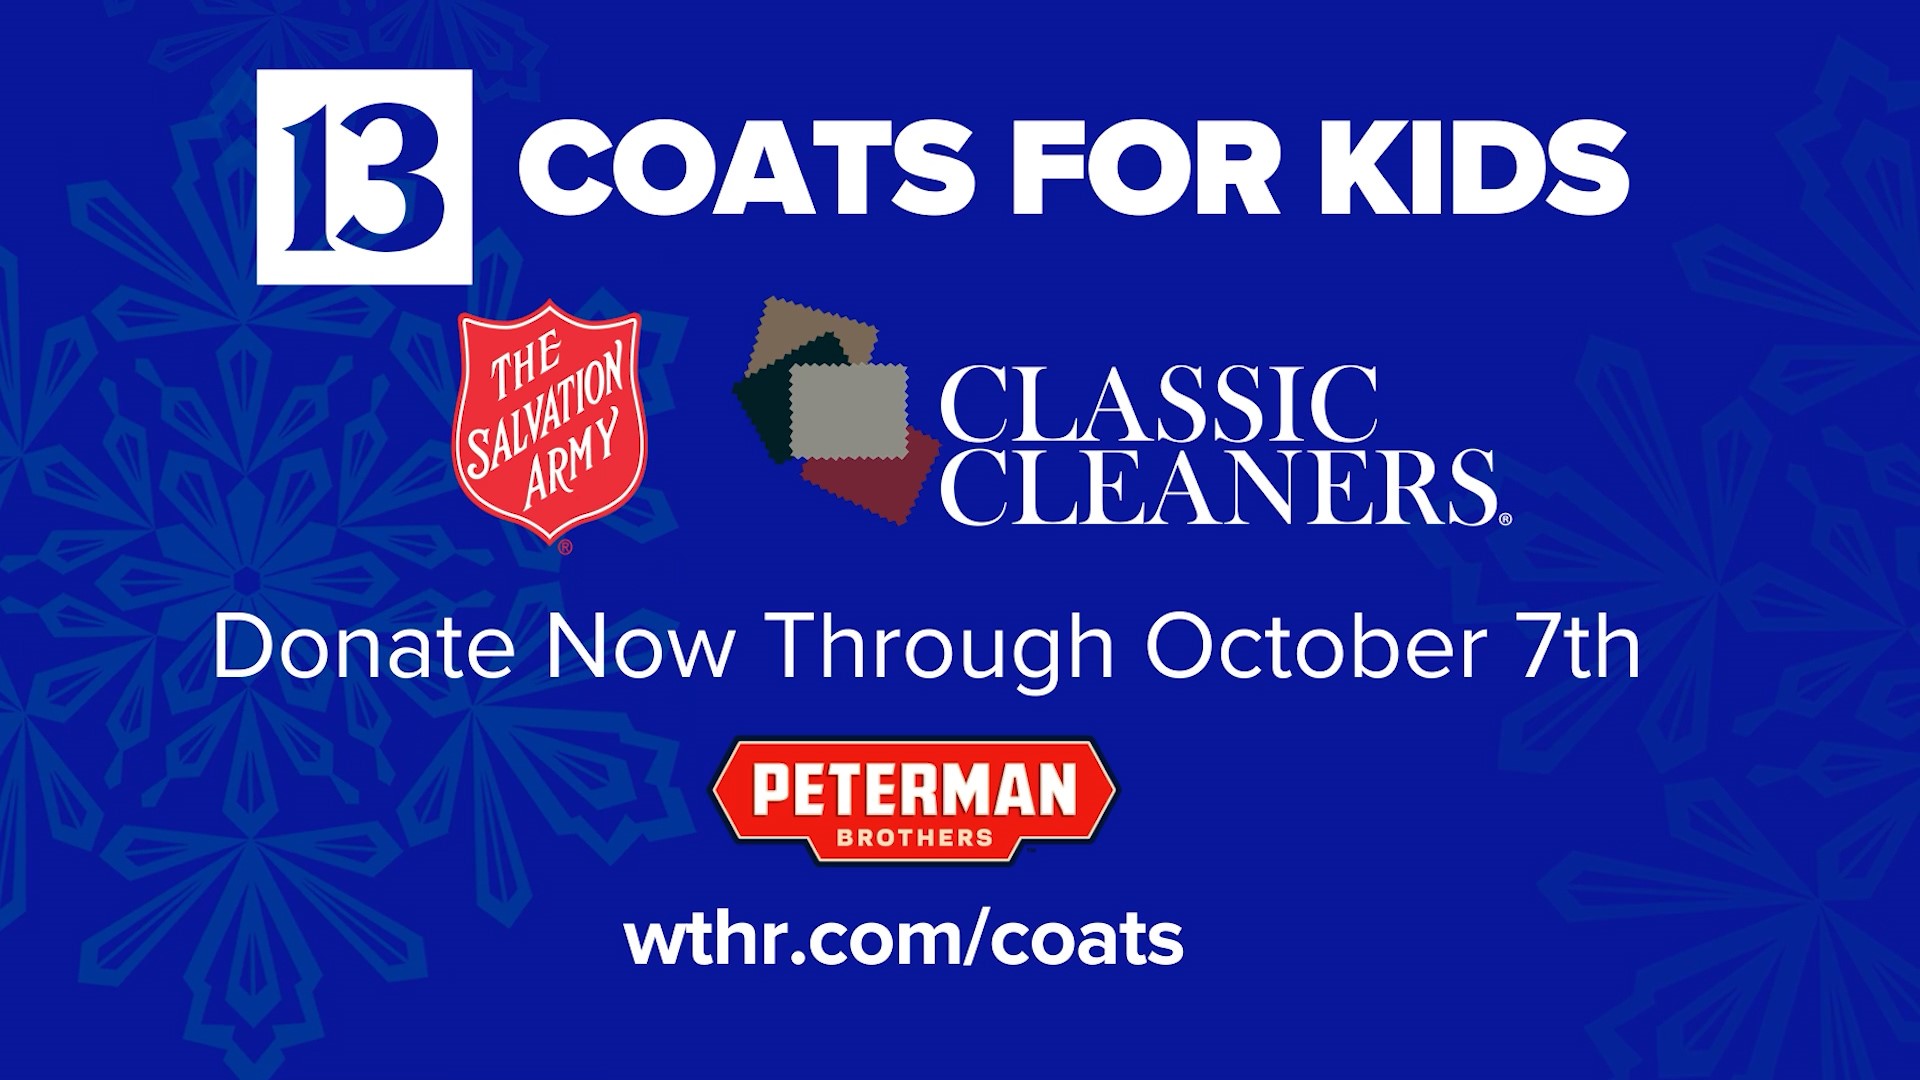 Donate any new or gently used kids coats at any Classic Cleaners.